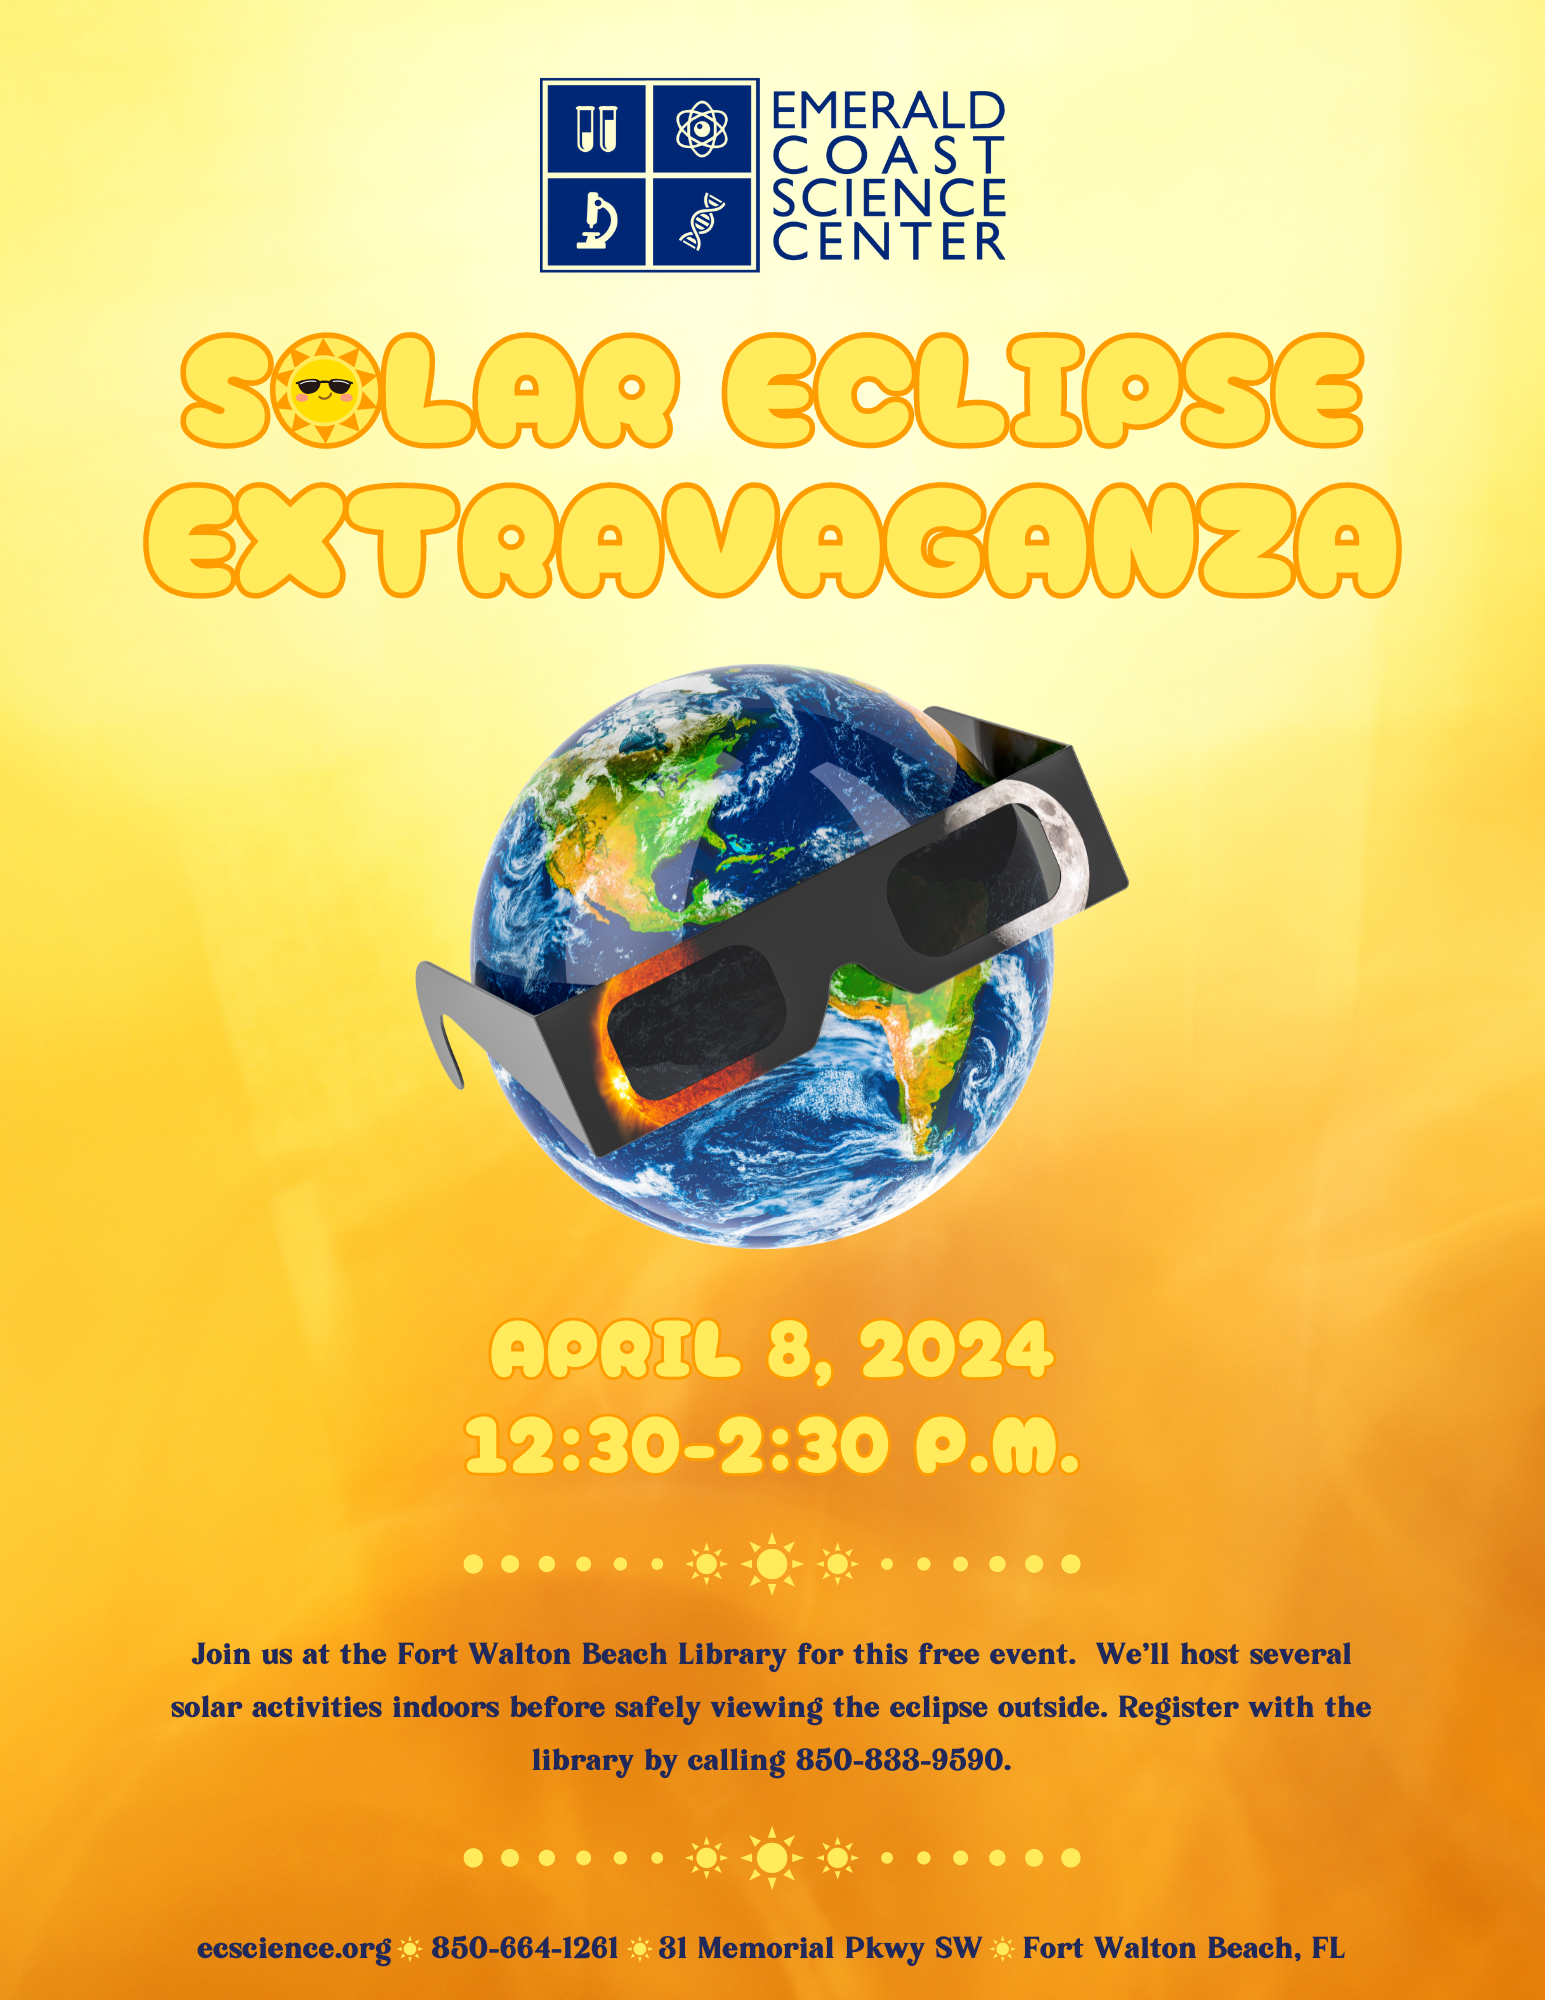 Flyer has a yellow background with a photo of the earth wearing solar eclipse glasses. It reads "Solar Eclipse Extravaganza" and contains the information found within the calendar event.